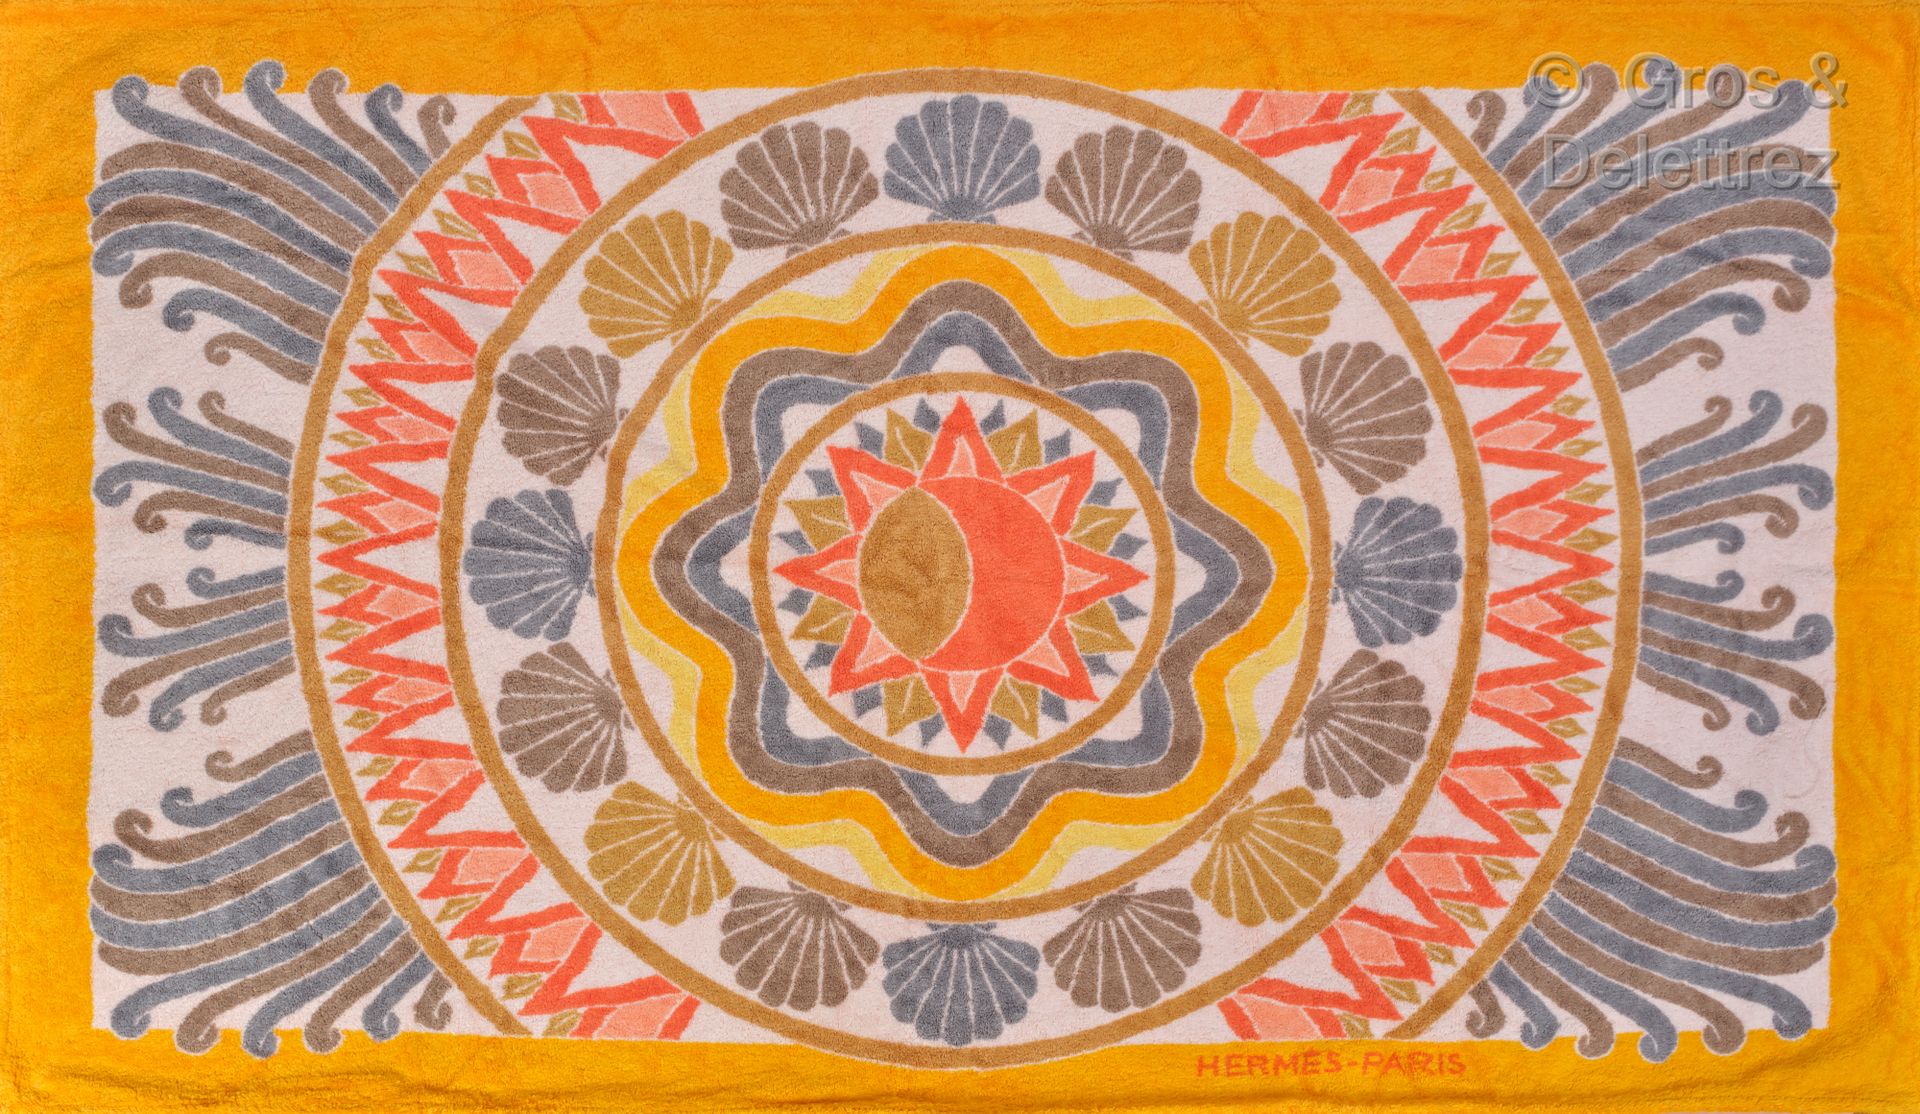 HERMES Paris Beach towel in terry cotton printed with a sun motif in a surround &hellip;